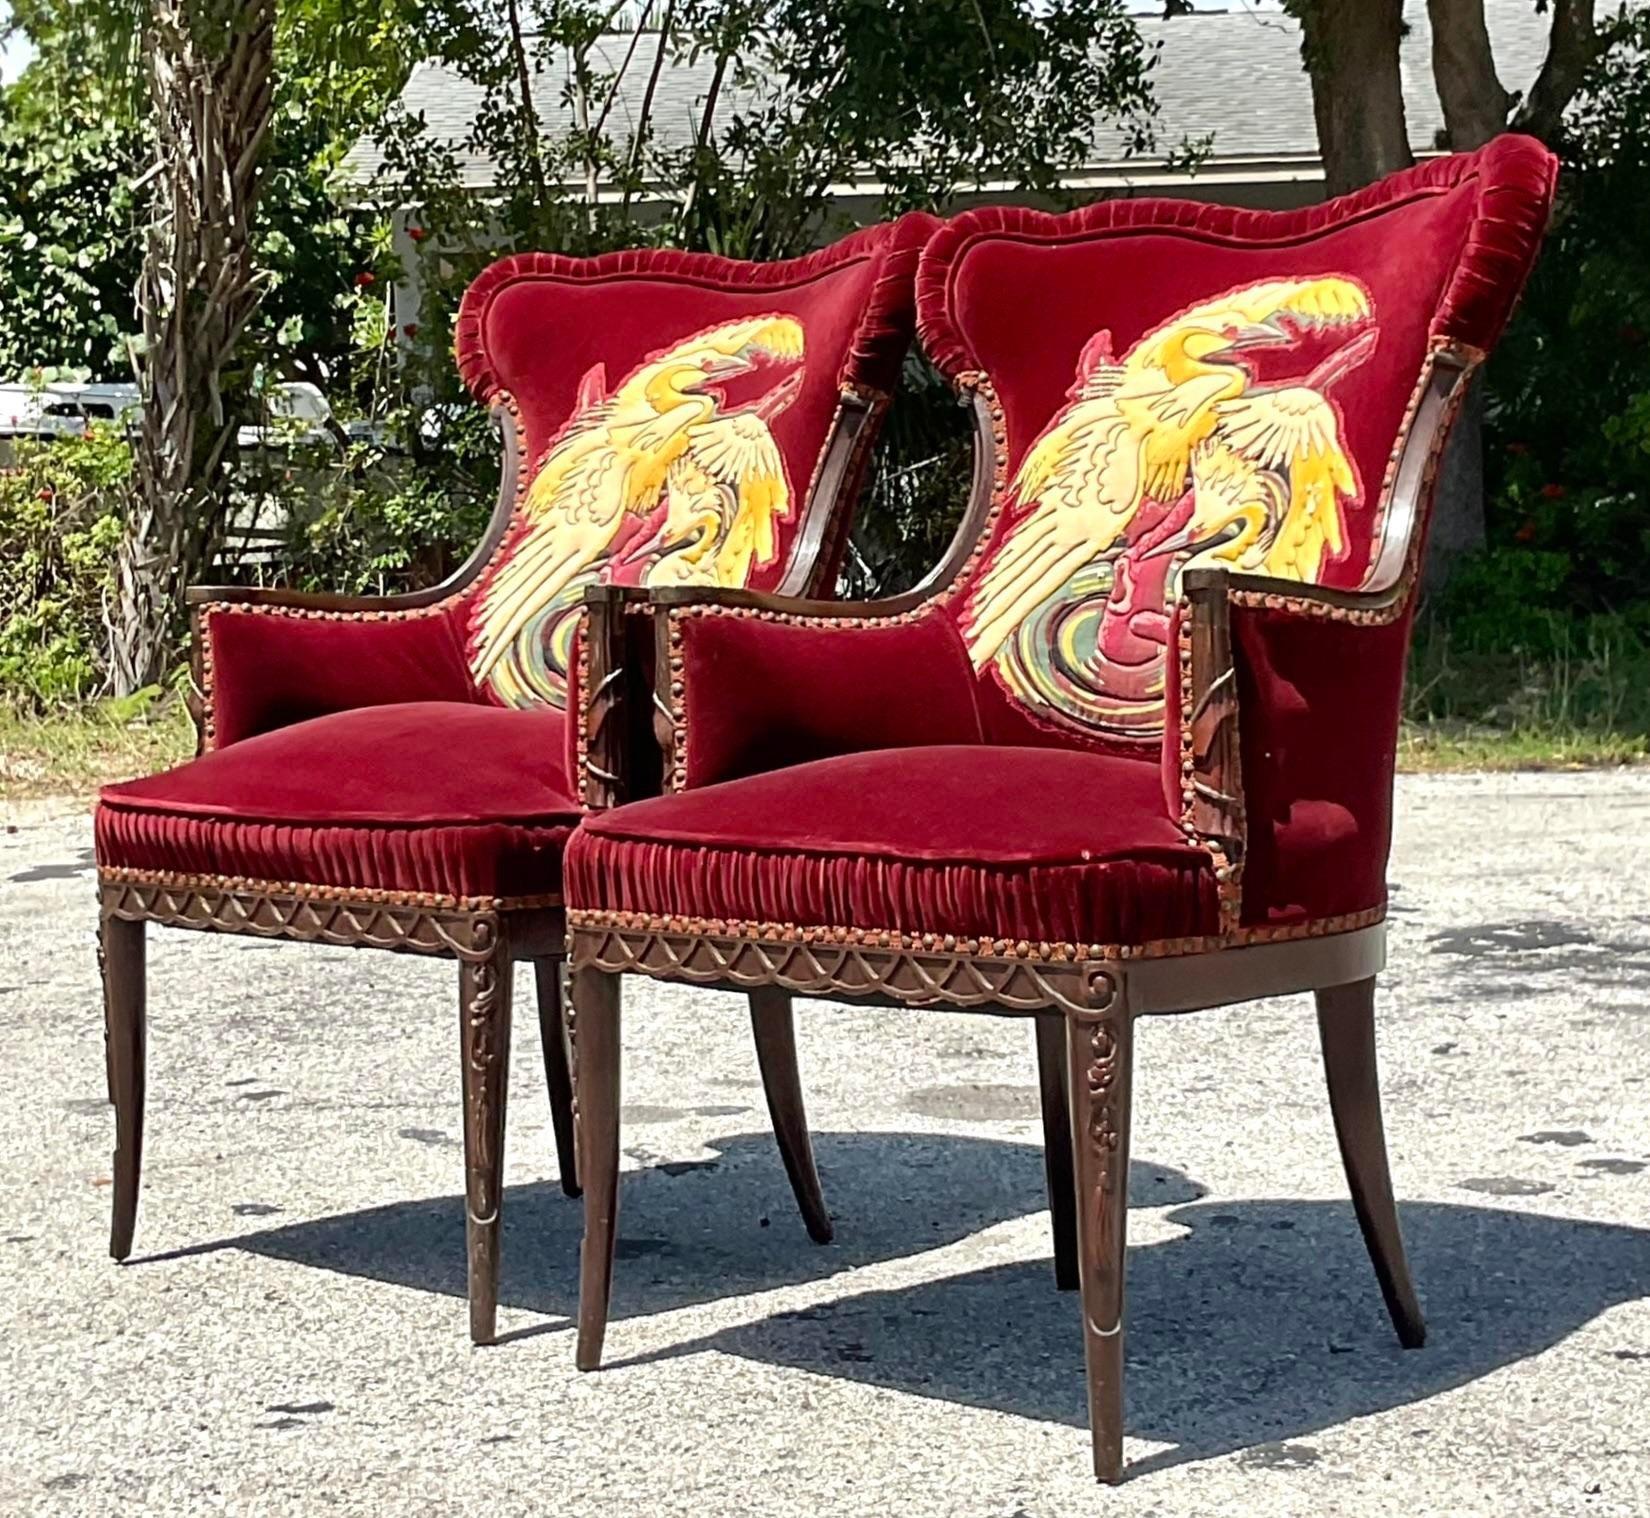 Vintage Boho Ruched Velvet Crane Arm Chairs - a Pair In Good Condition For Sale In west palm beach, FL